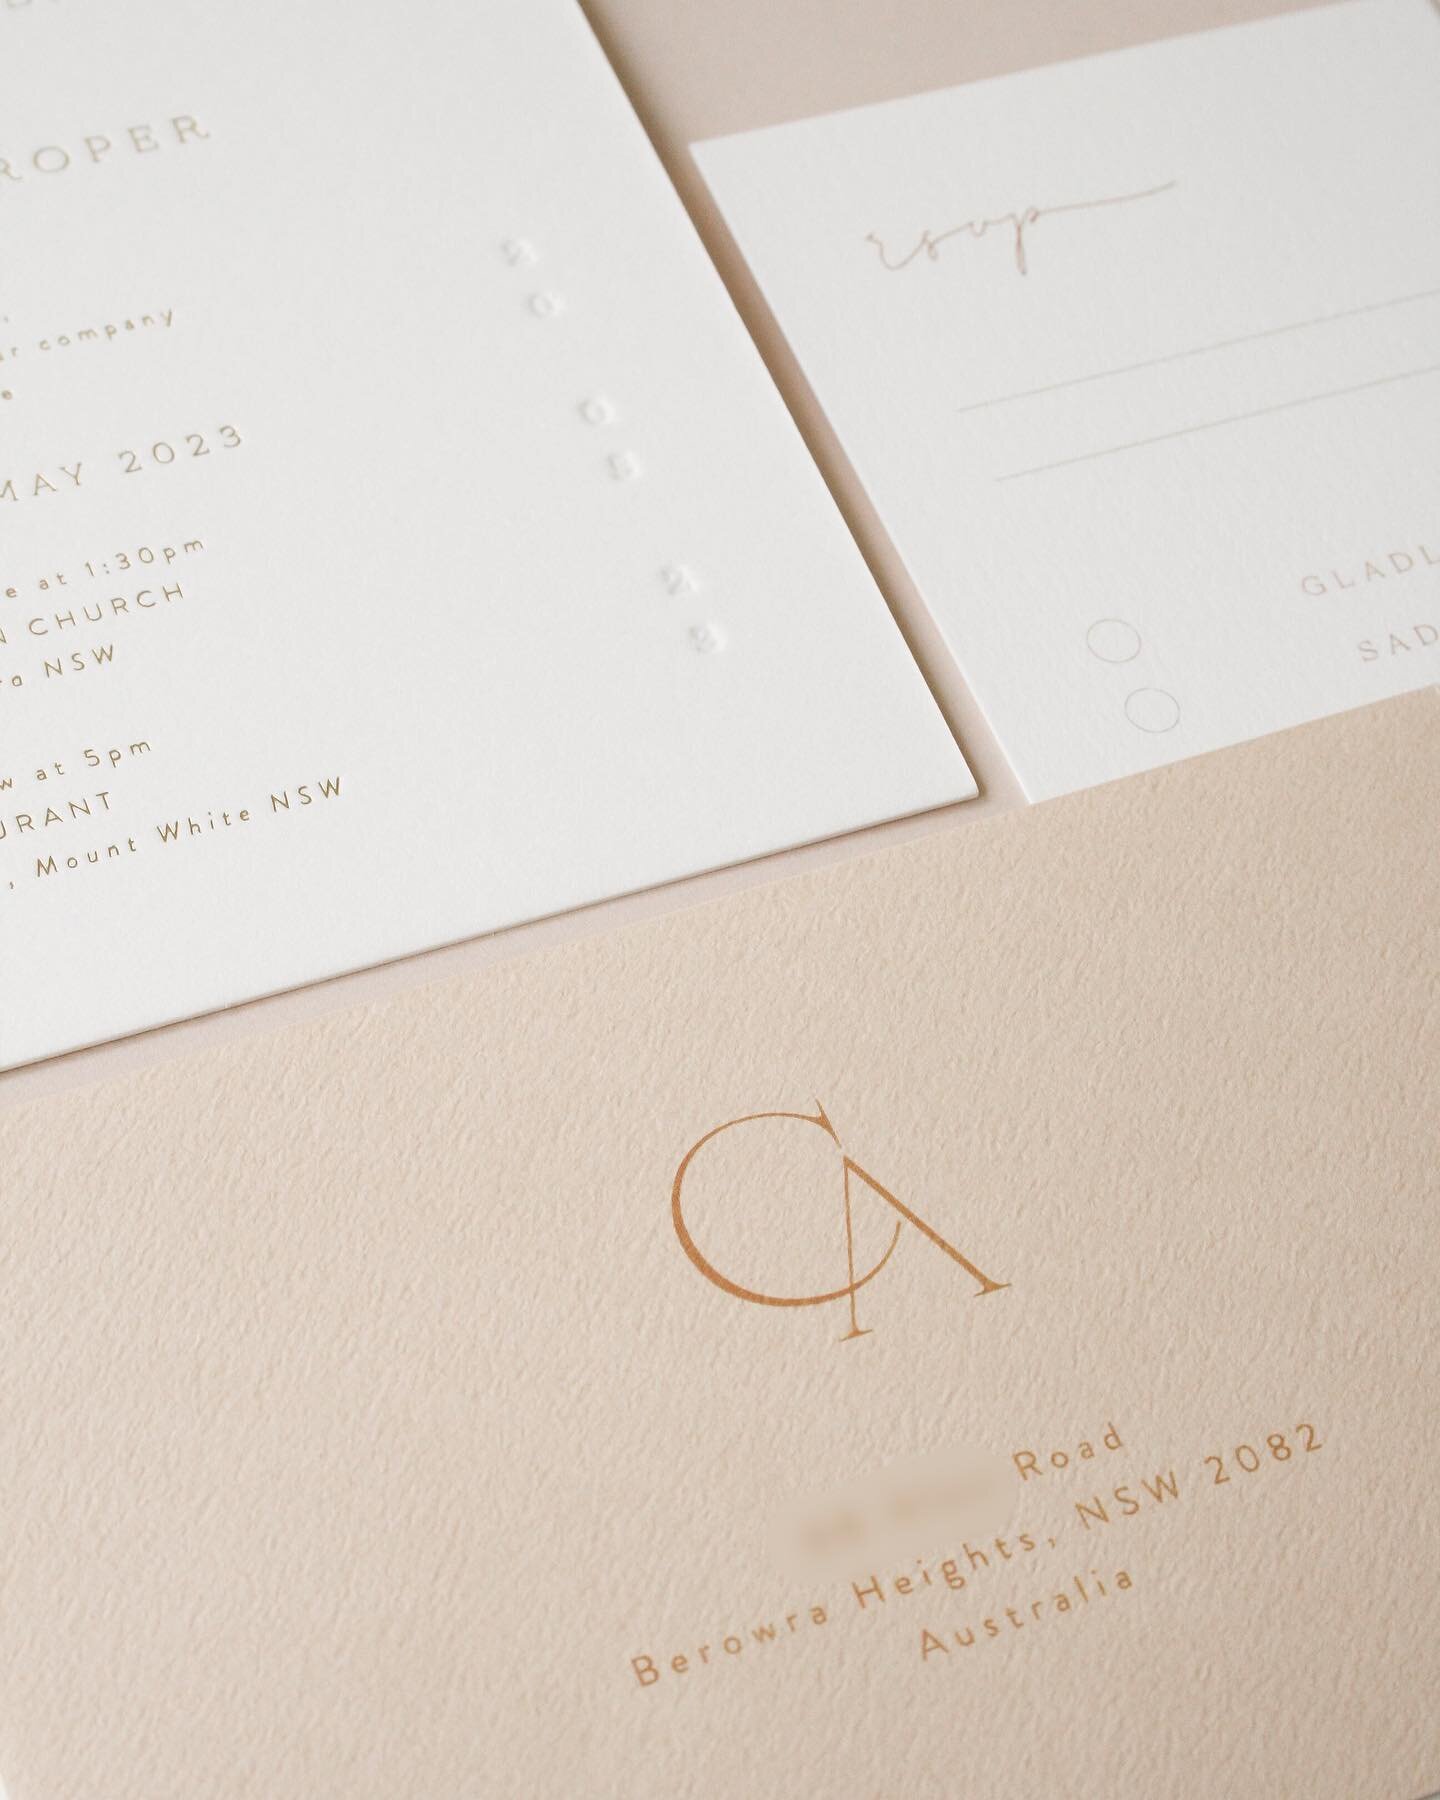 Chantal &amp; Adam&rsquo;s initials just made the perfect monogram 🤍 
More of this luxe autumnal suite coming soon &mdash; it&rsquo;s one of our most-loved previous designs, but with a fun twist!